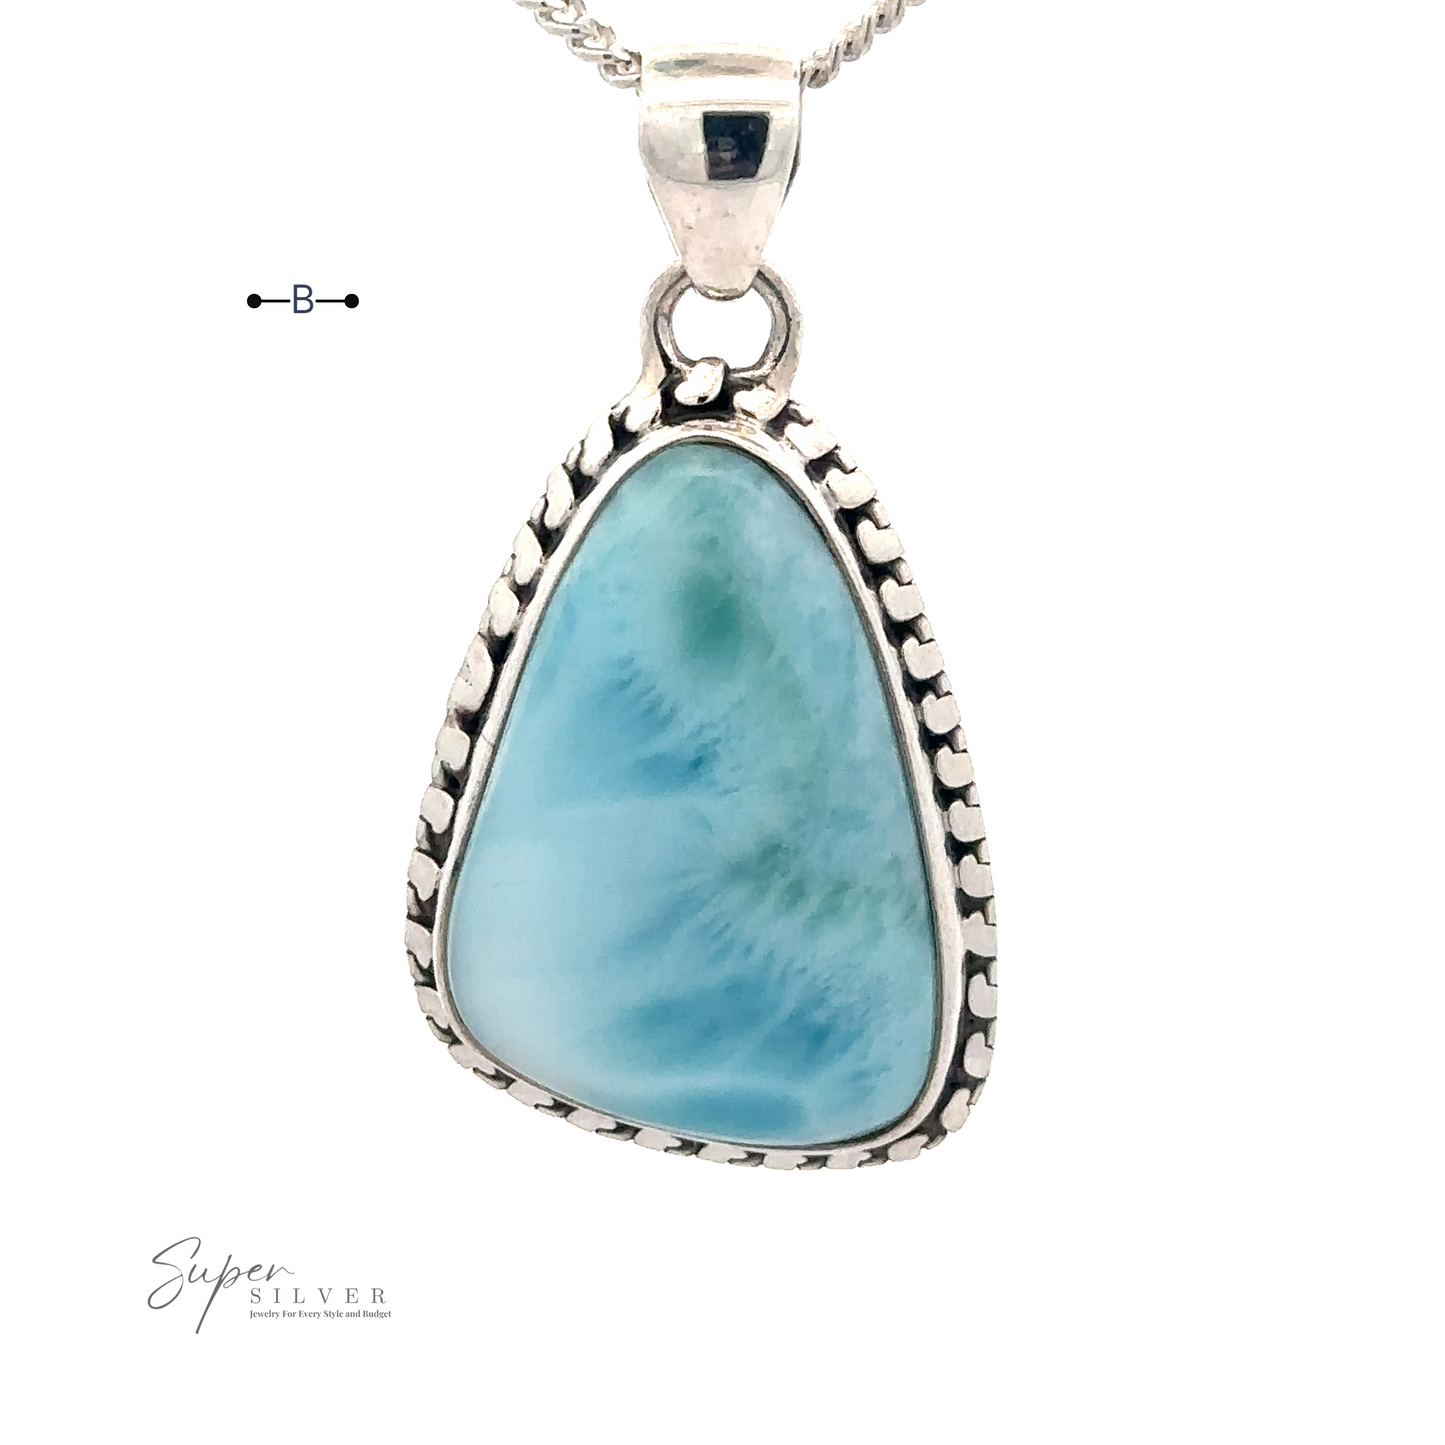 
                  
                    Larimar Pendant with Decorated Border with a stunning blue Larimar gemstone set in a decorative .925 Sterling Silver frame, hanging from a silver chain. The background is a plain white surface. Chain not included.
                  
                